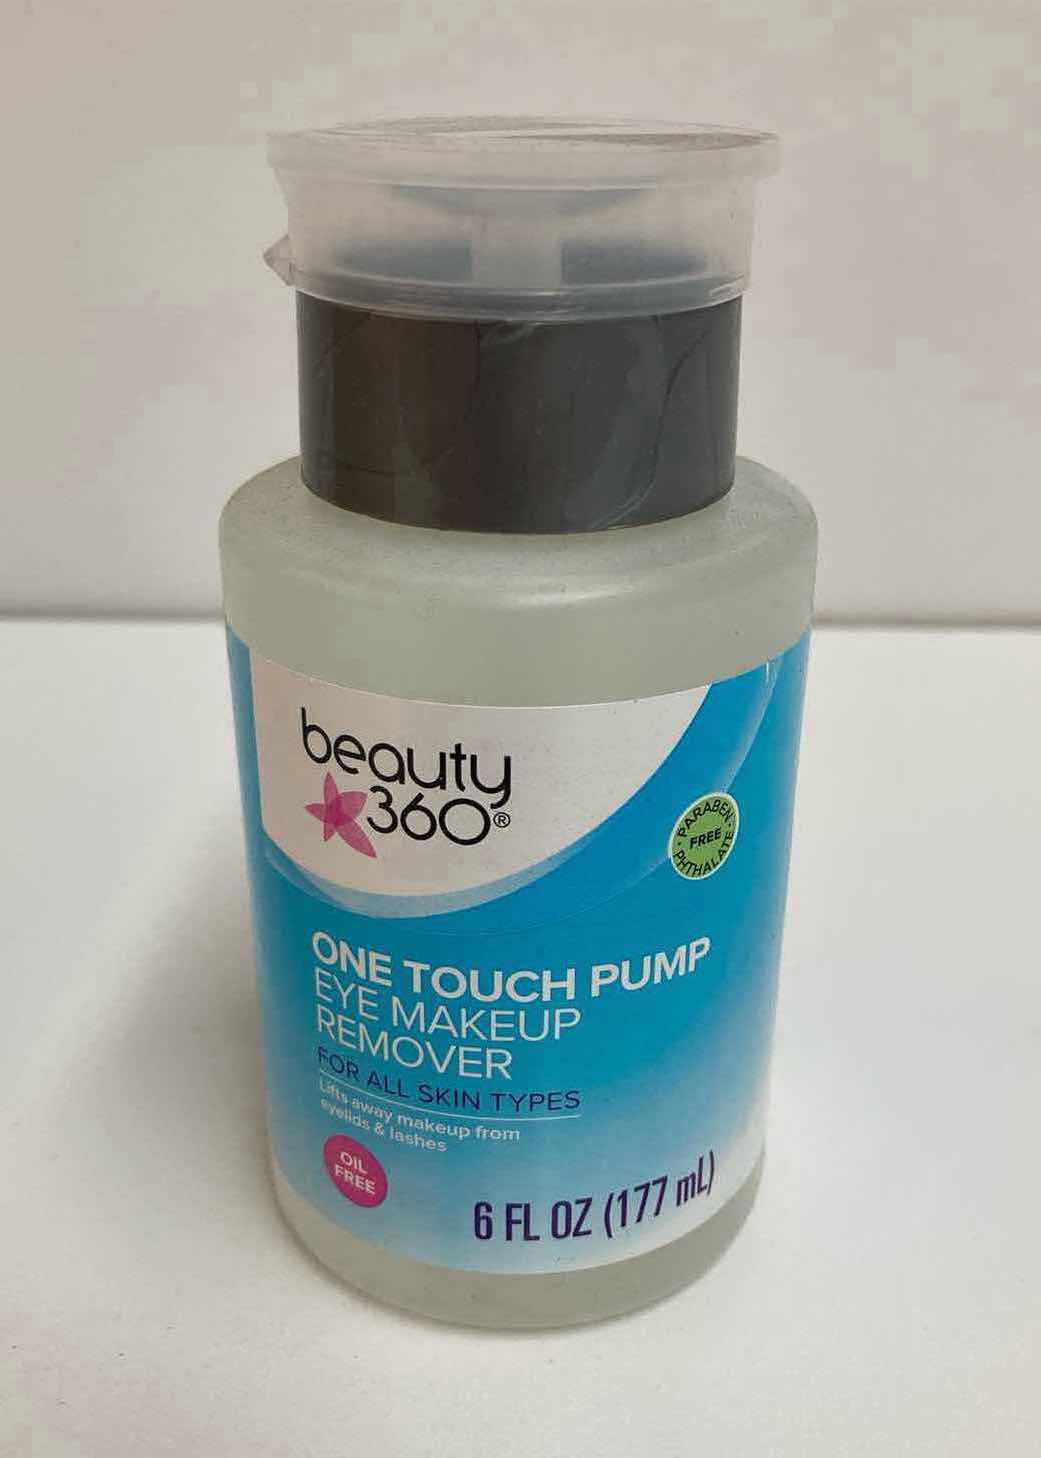 Photo 1 of BEAUTY 360 ONE TOUCH PUMP EYE MADE UP REMOVER (4)